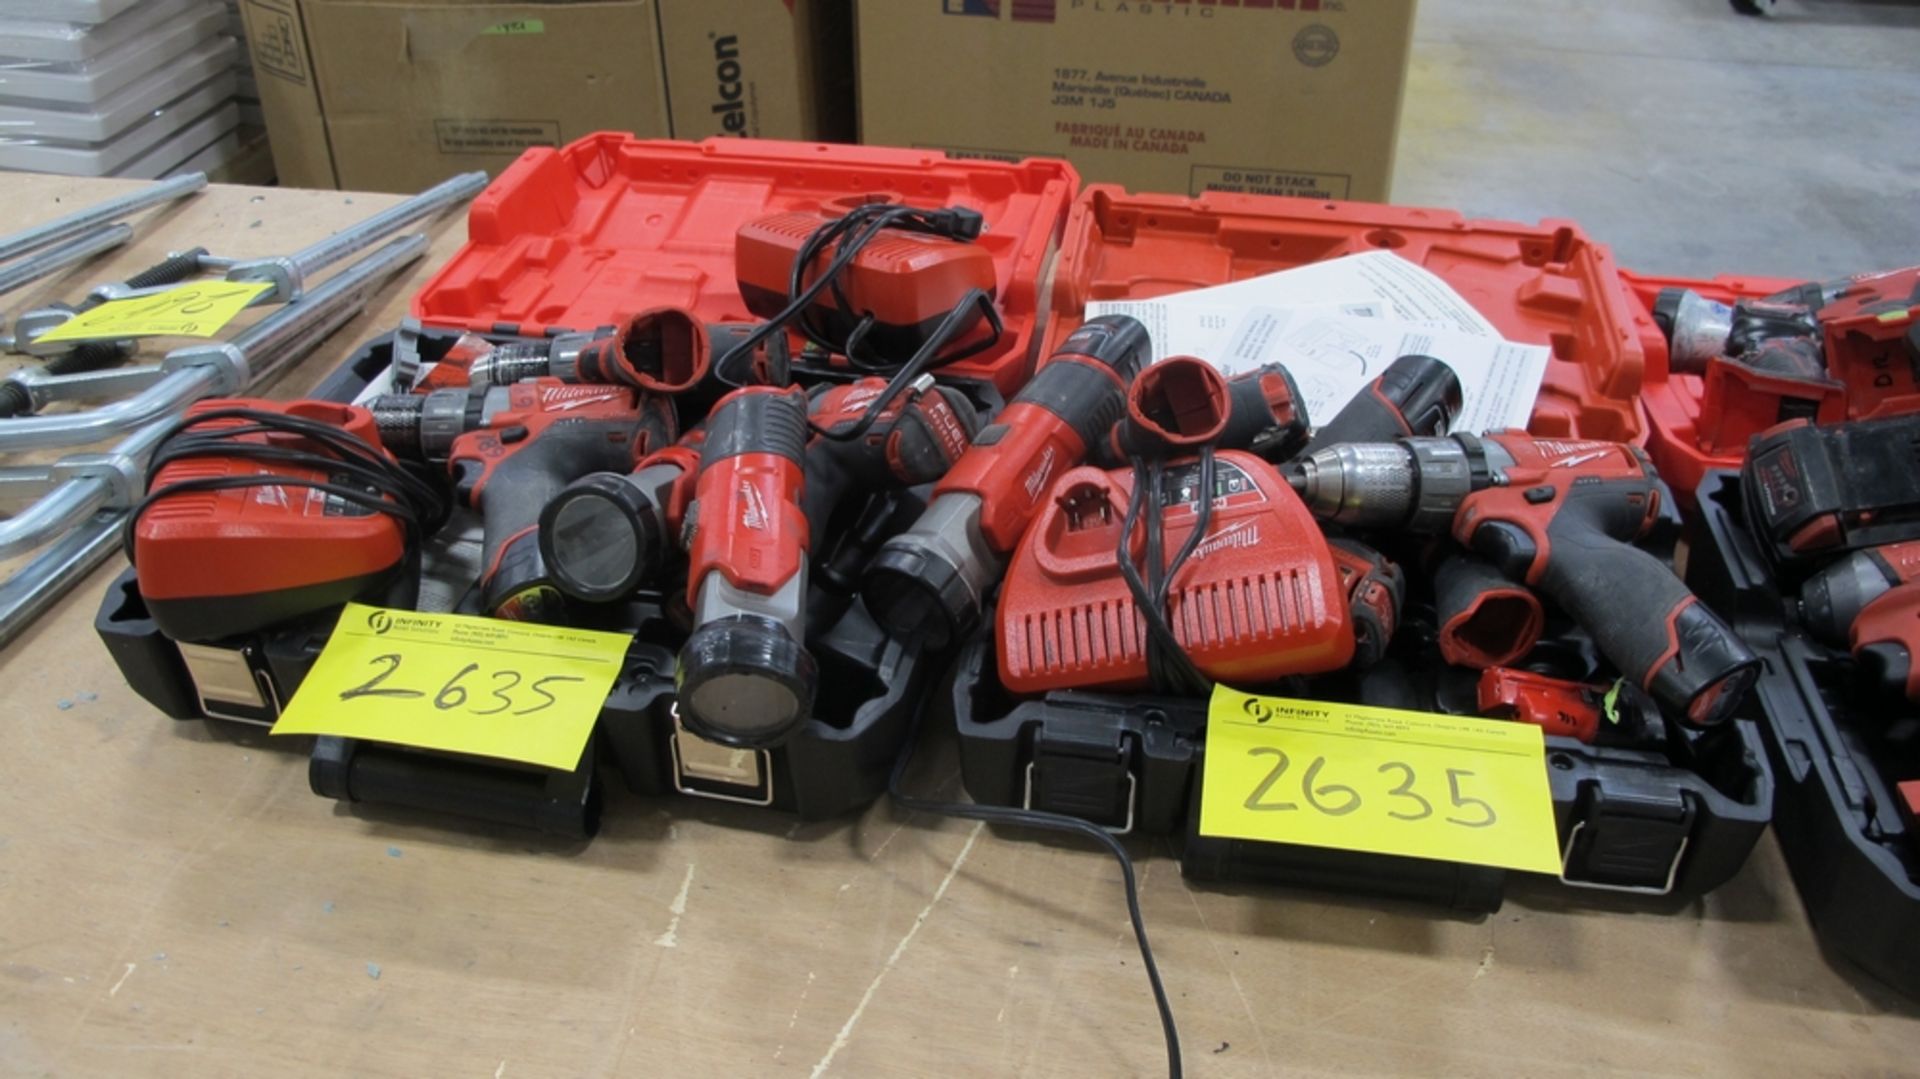 LOT OF 2 MILWAUKEE M12 DRIVER KITS W/CHARGERS, BATTERIES, DRIVERS, LIGHTS AND HEX KEY DRIVERS (400